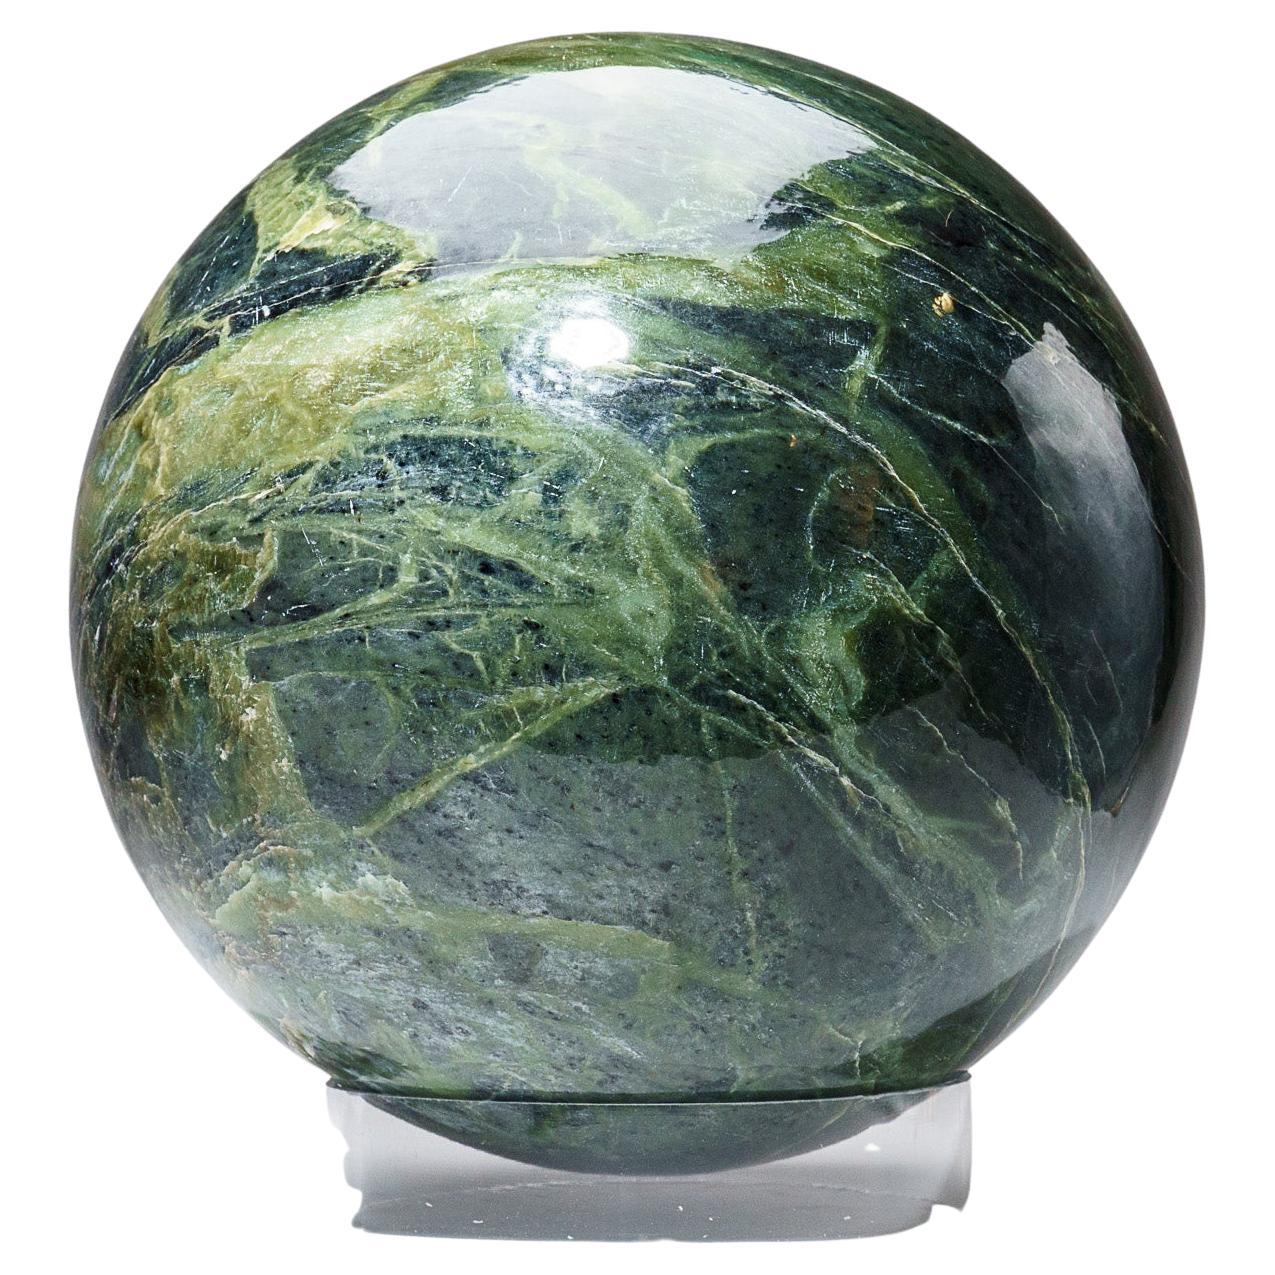 Huge Genuine Polished Nephrite Jade Sphere from Pakistan, '65 Lbs' For Sale